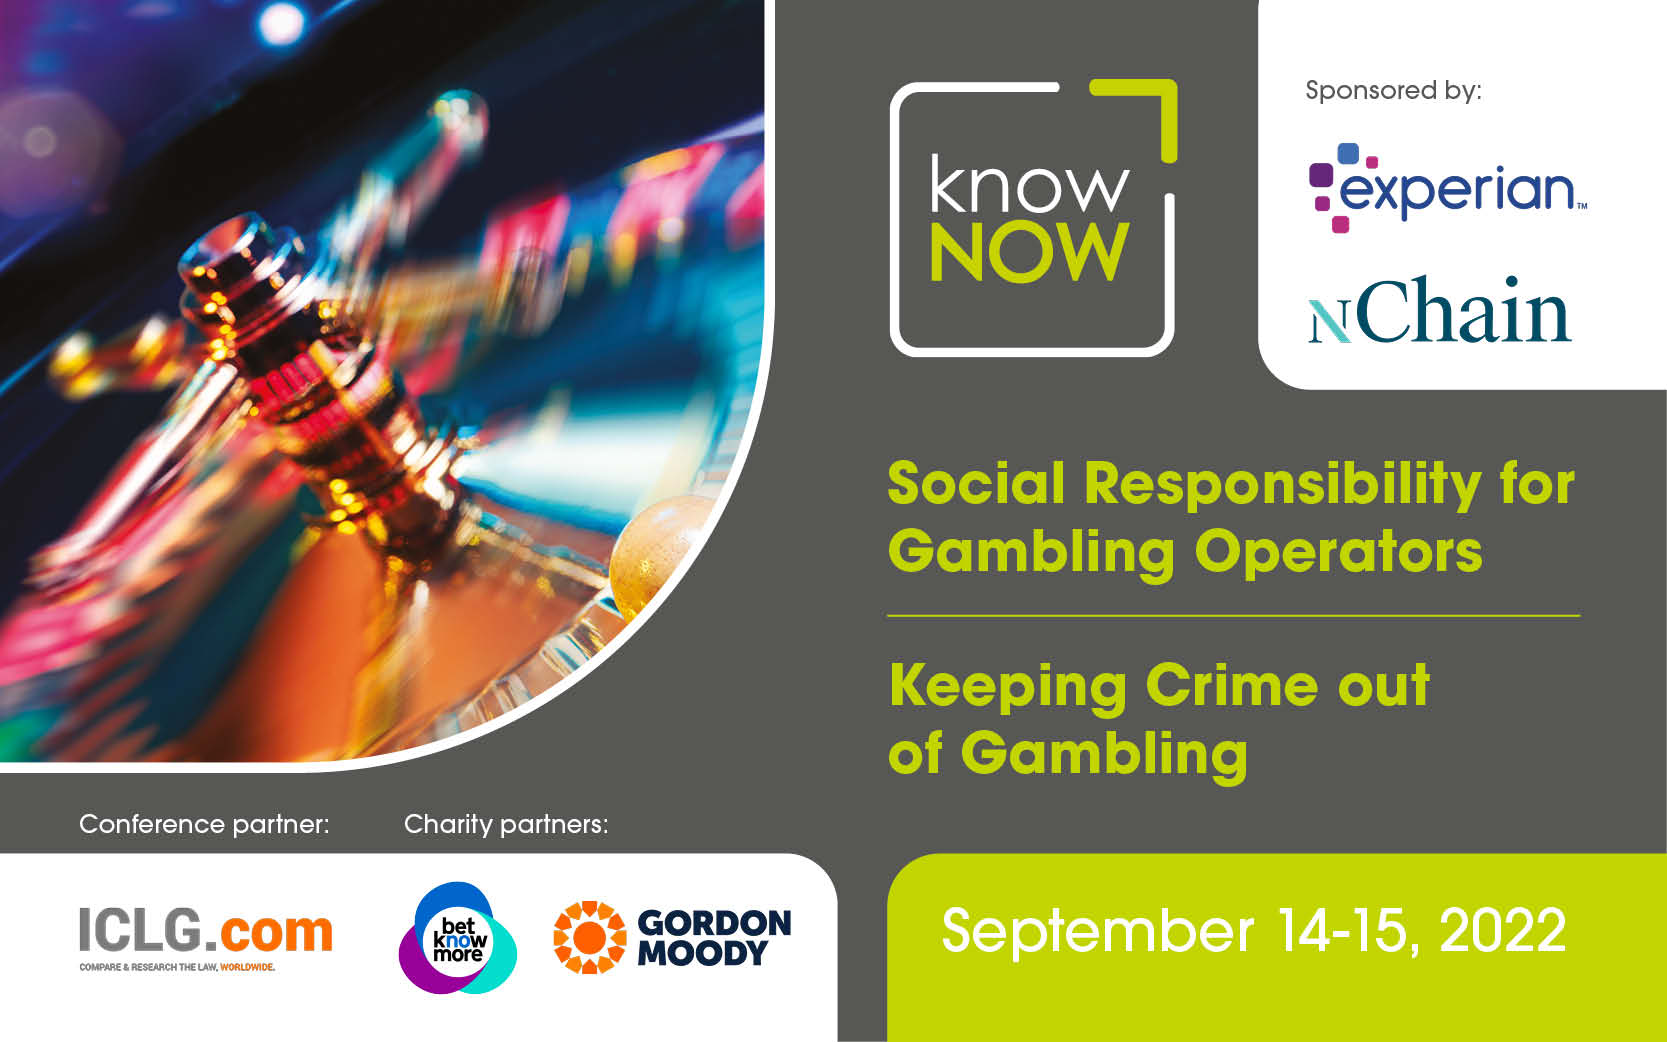 Social Responsibility for Gambling Operators and Keeping Crime out of Gambling from KnowNow Limited